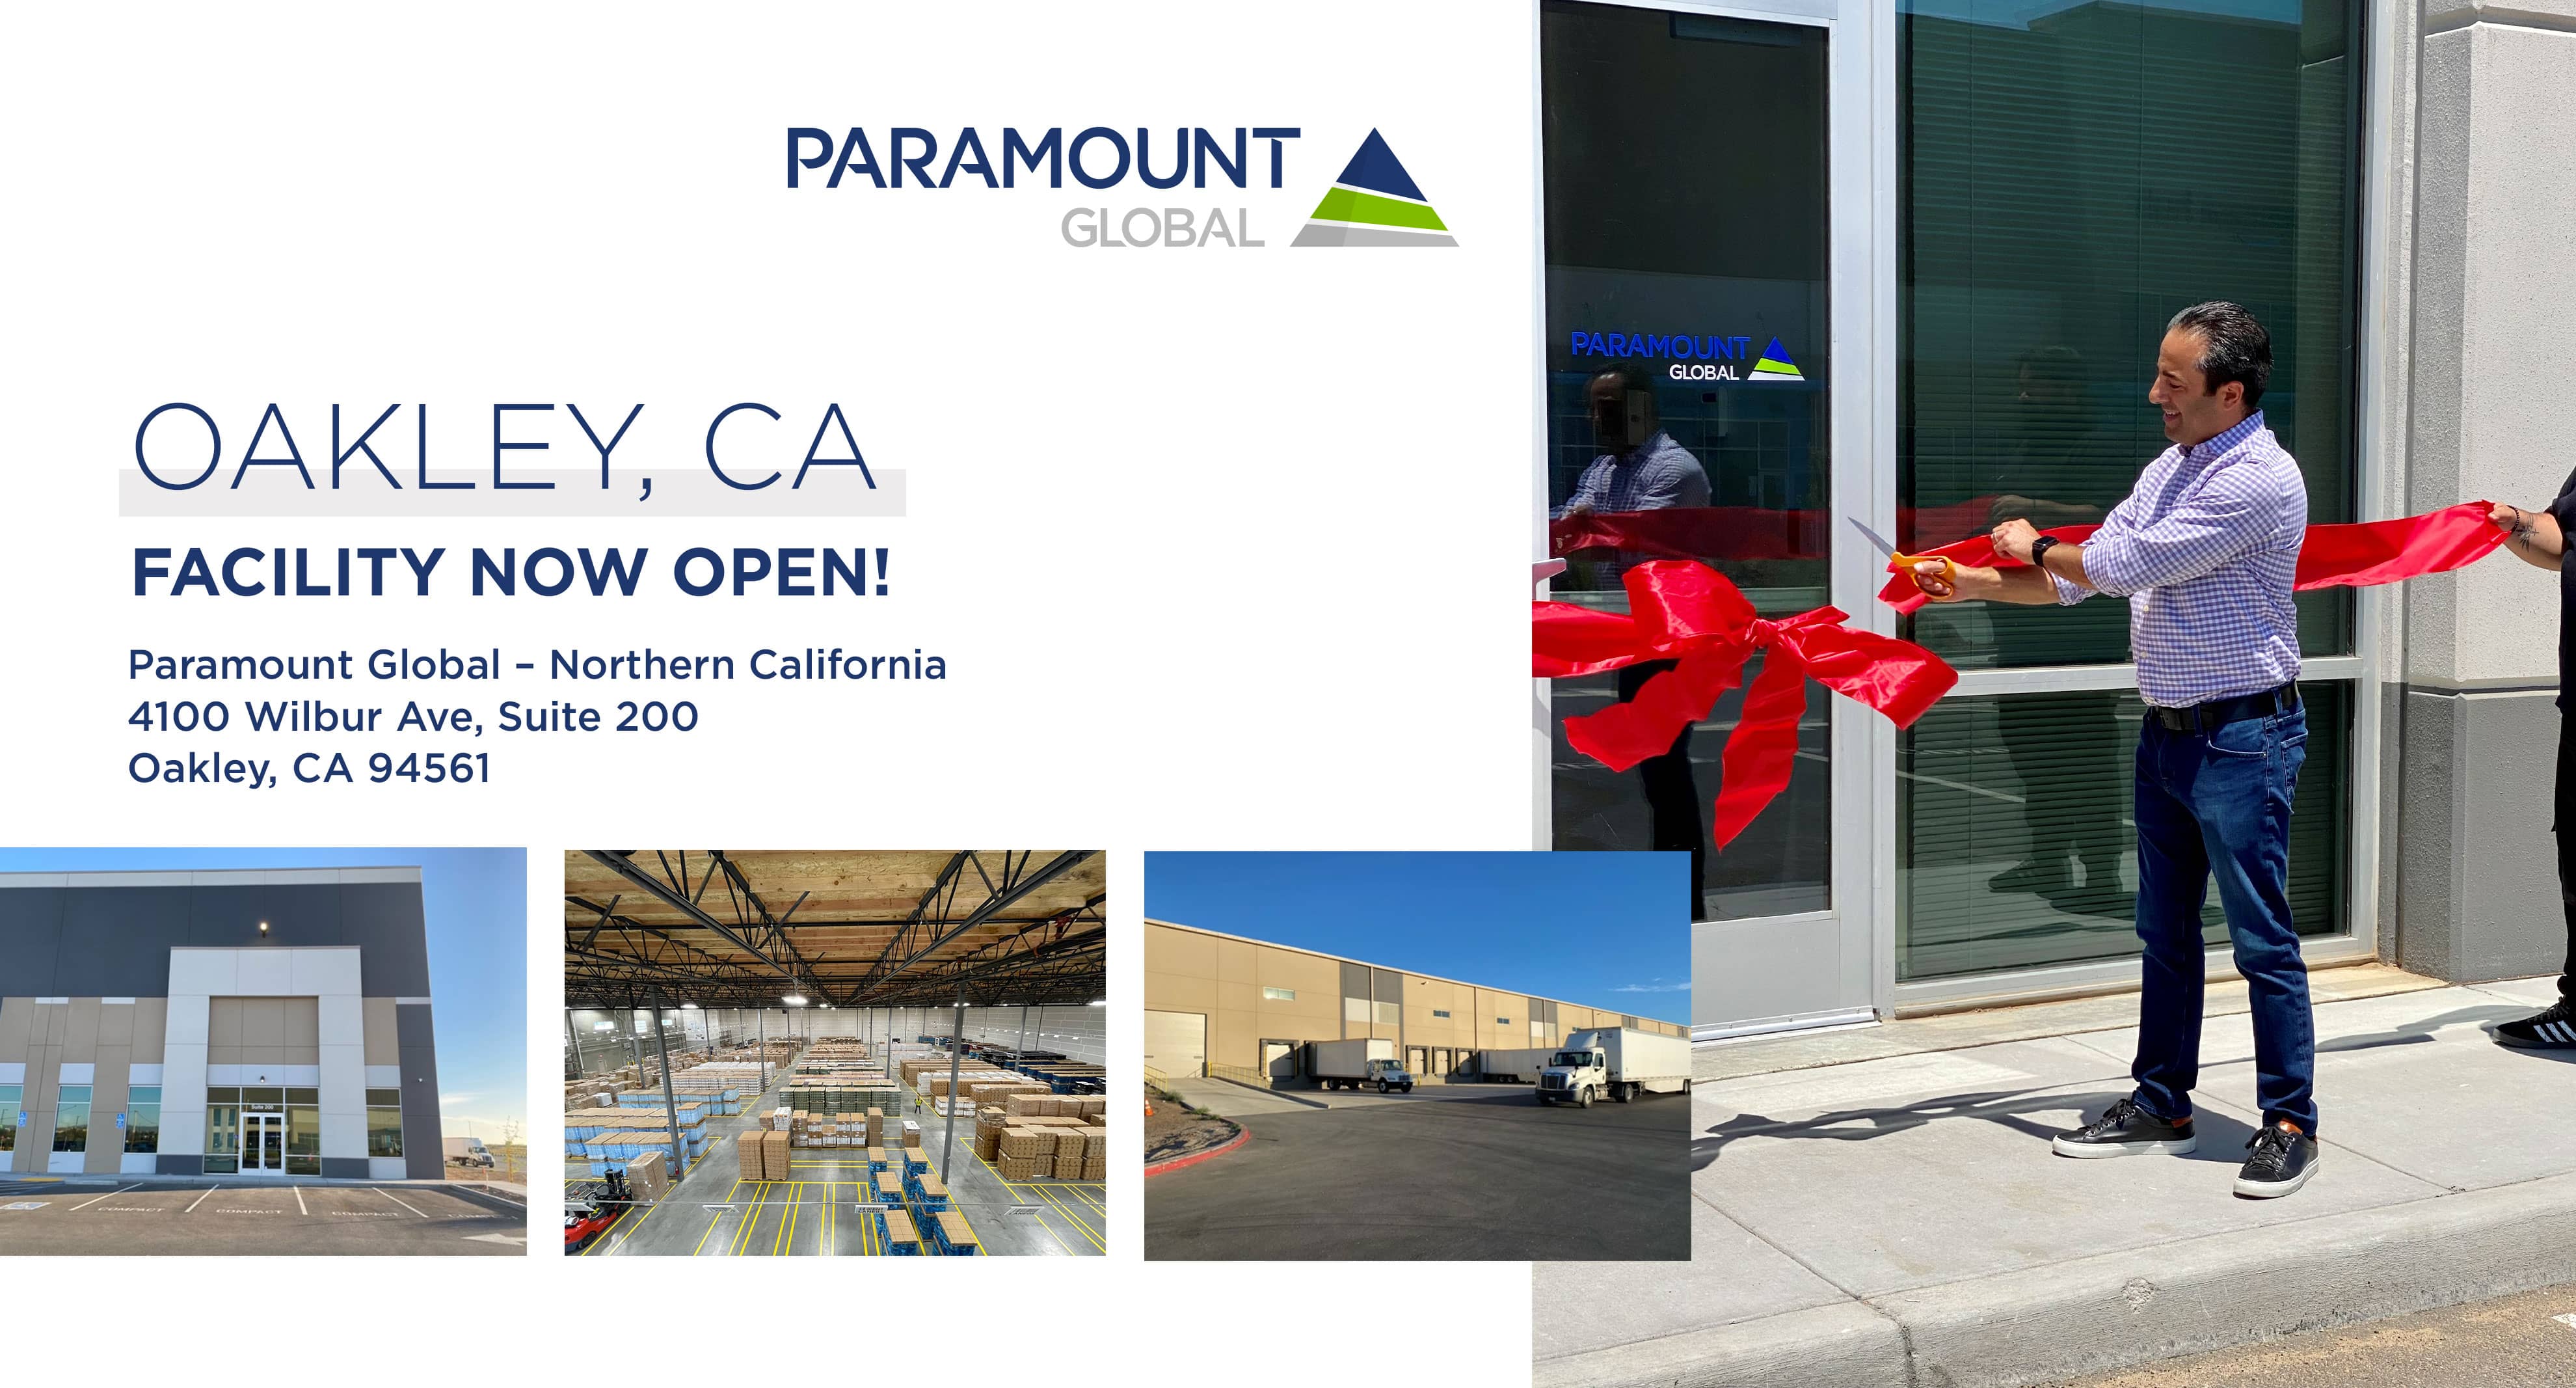 Paramount Global Oakley Facility Now Open Banner